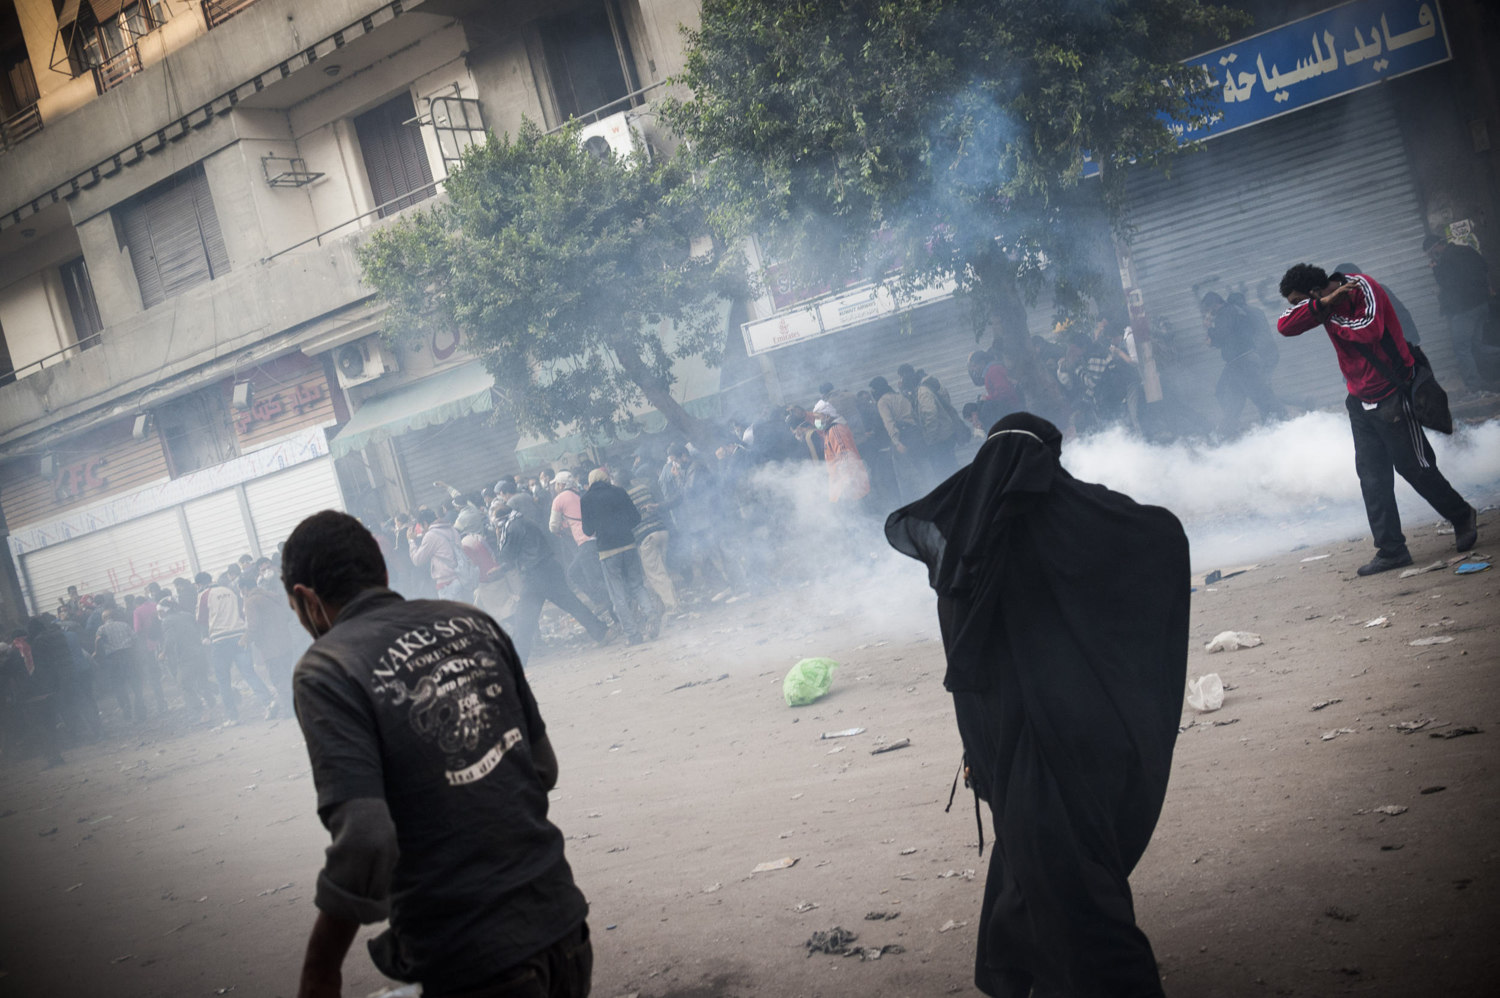  A woman runs from teargas and rubber bullets shot off by the Egyptian riot Police on November 22nd 2011.  Protestors gather in Cairo’s Tahrir square to speak out against SCAF, the Supreme Council of the Armed Forces, which has governed Egypt since t